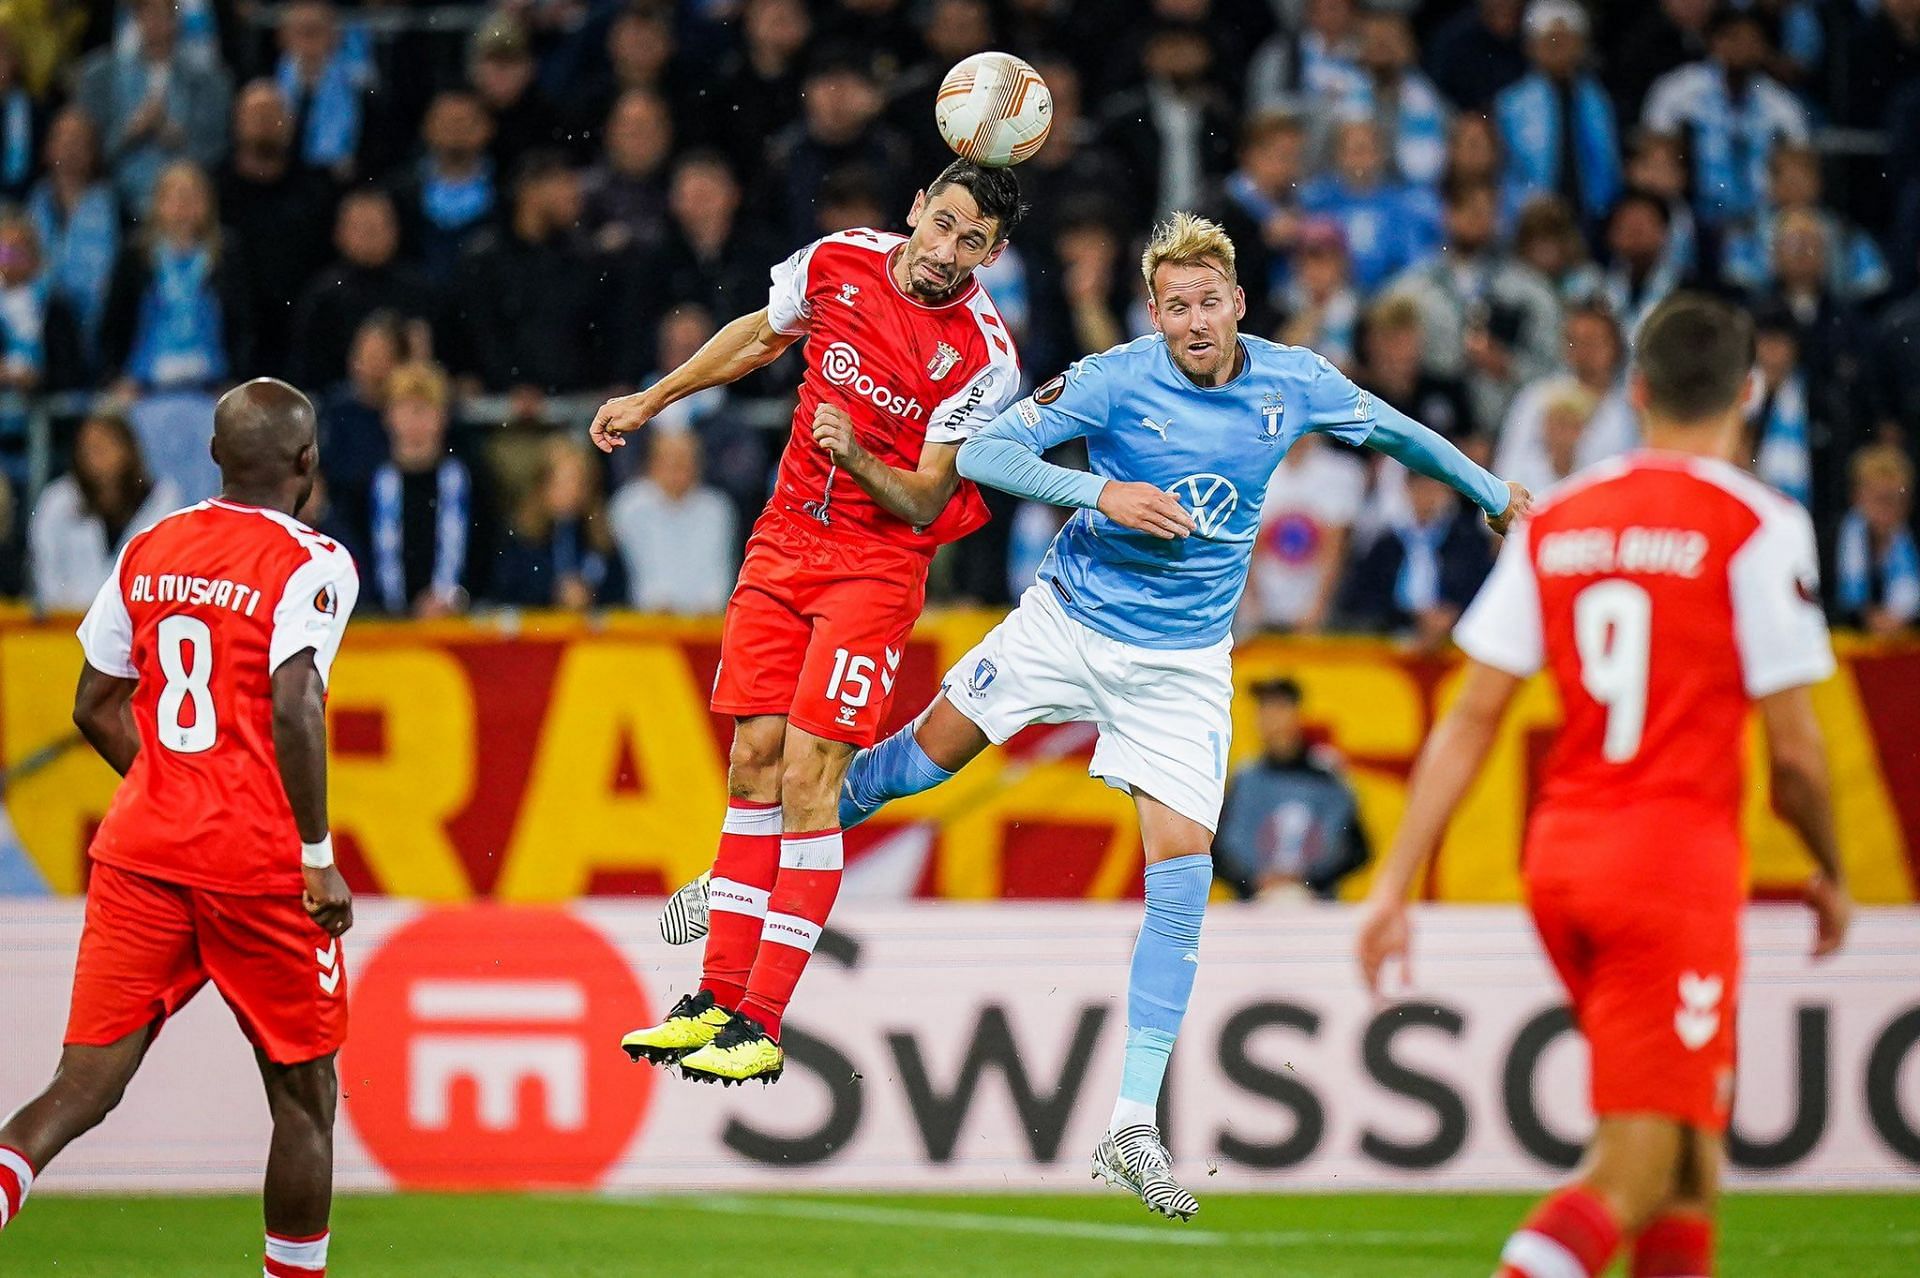 Malmo and Braga meet in the last group stage game of the Europa League on Thursday